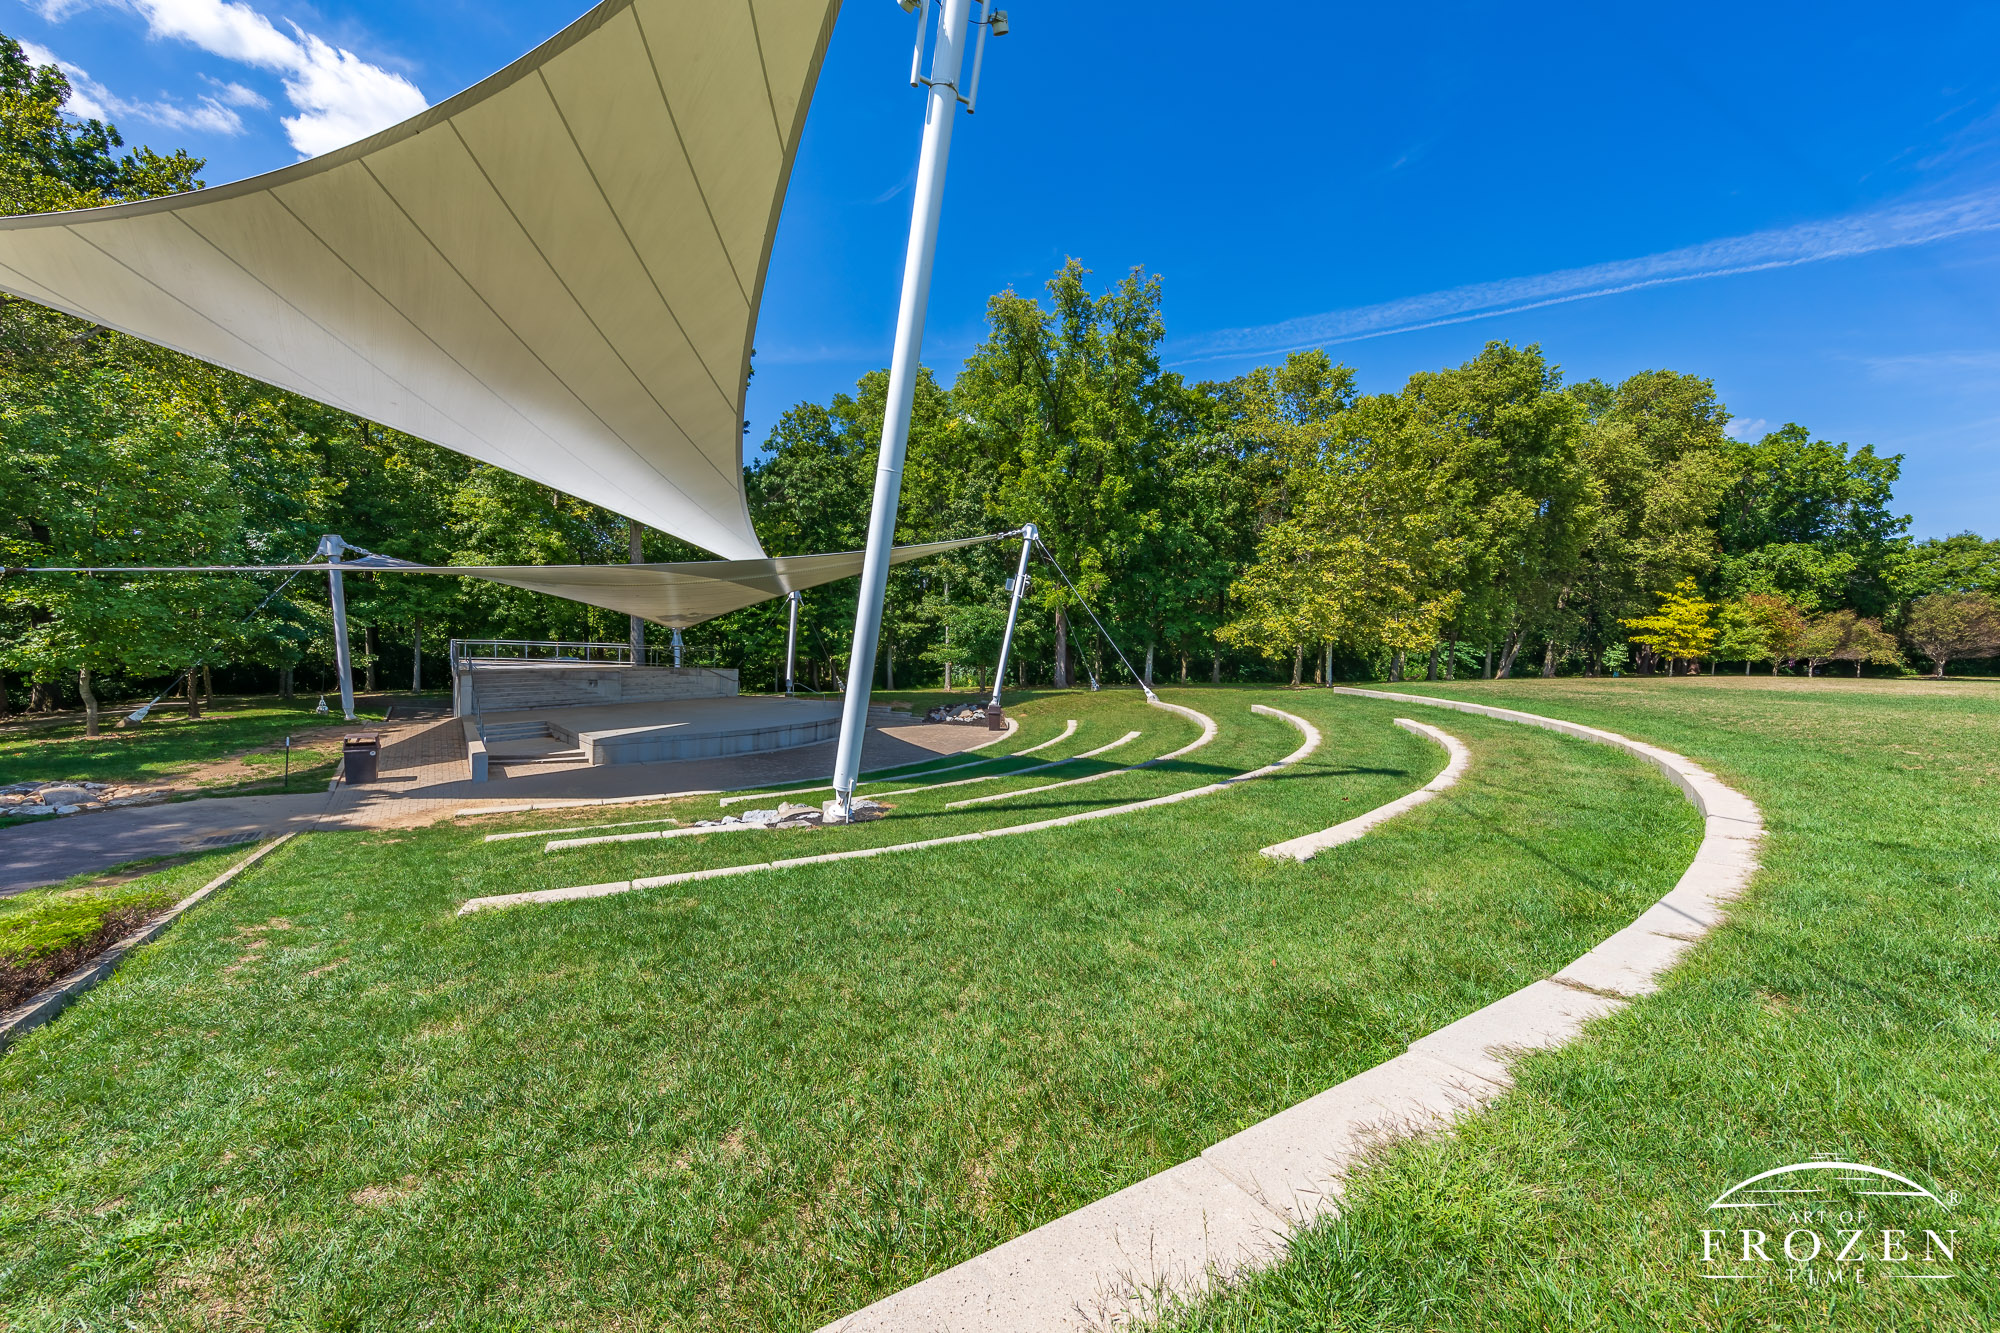 The outdoor amphitheater at Springboro's North Park where solar sails provide a shady spot on this summer day